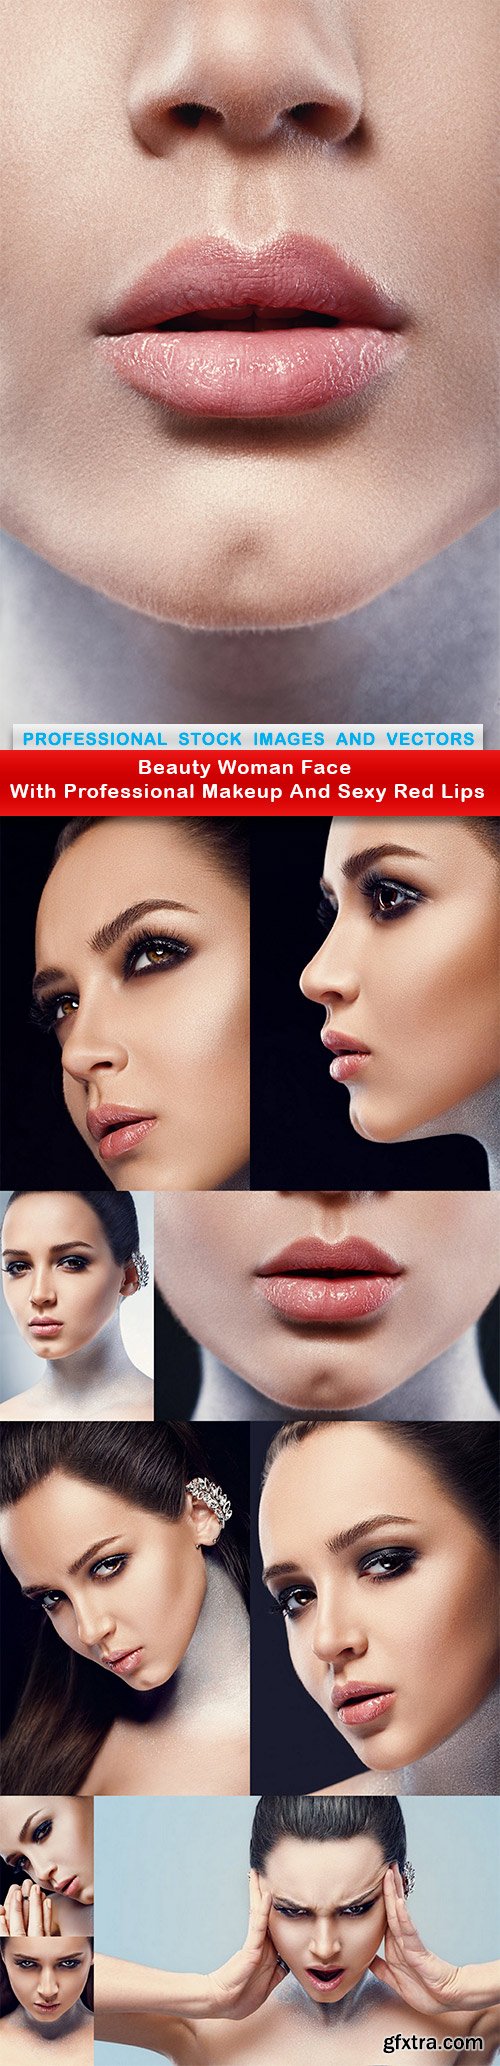 Beauty Woman Face With Professional Makeup And Sexy Red Lips - 10 UHQ JPEG